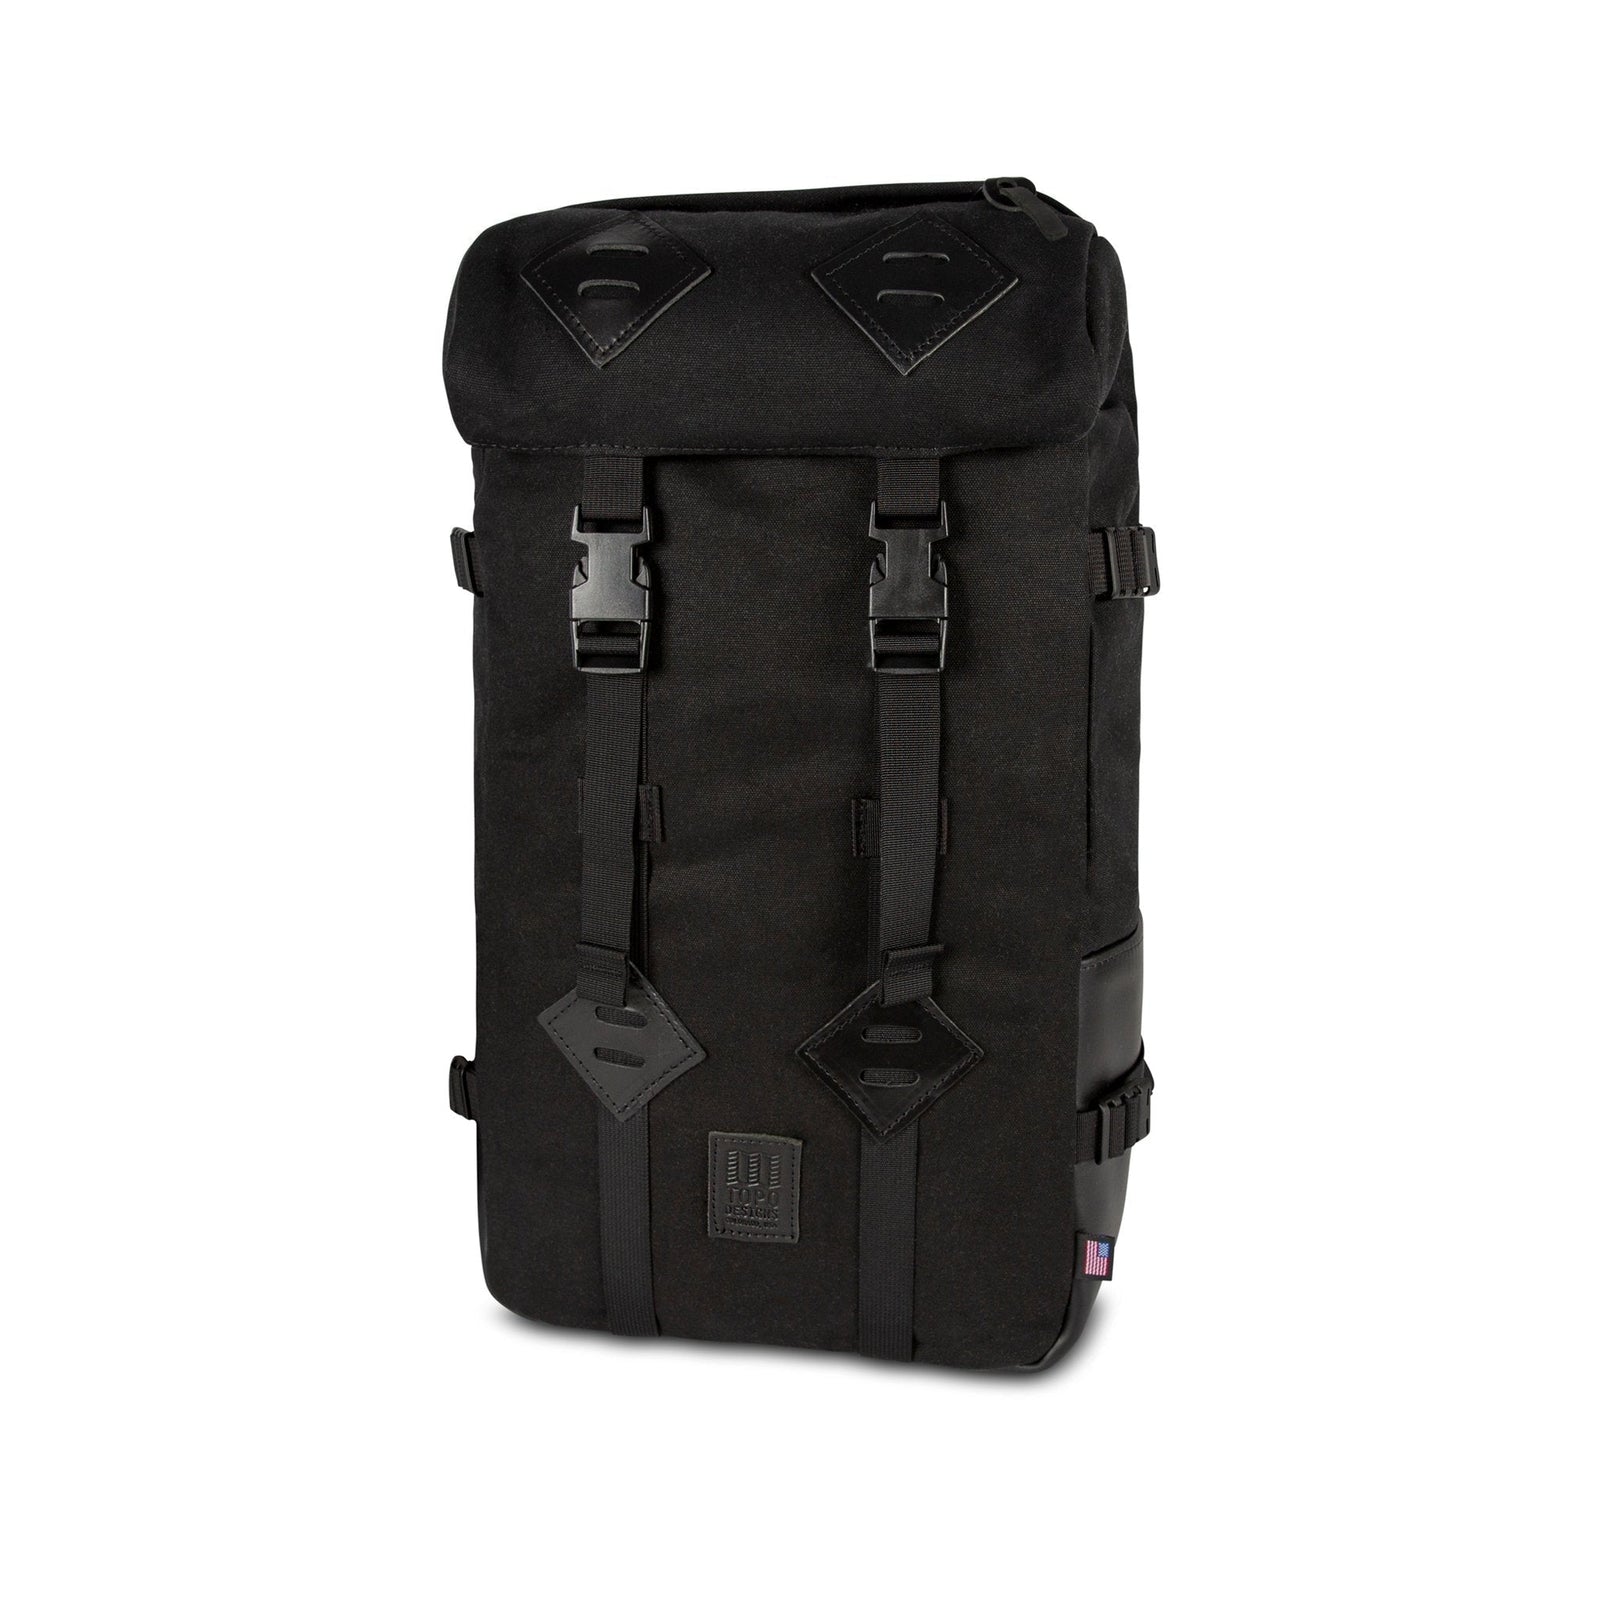 Topo Designs Klettersack Heritage Canvas Made in USA backpack in "Black Canvas / Black Leather".